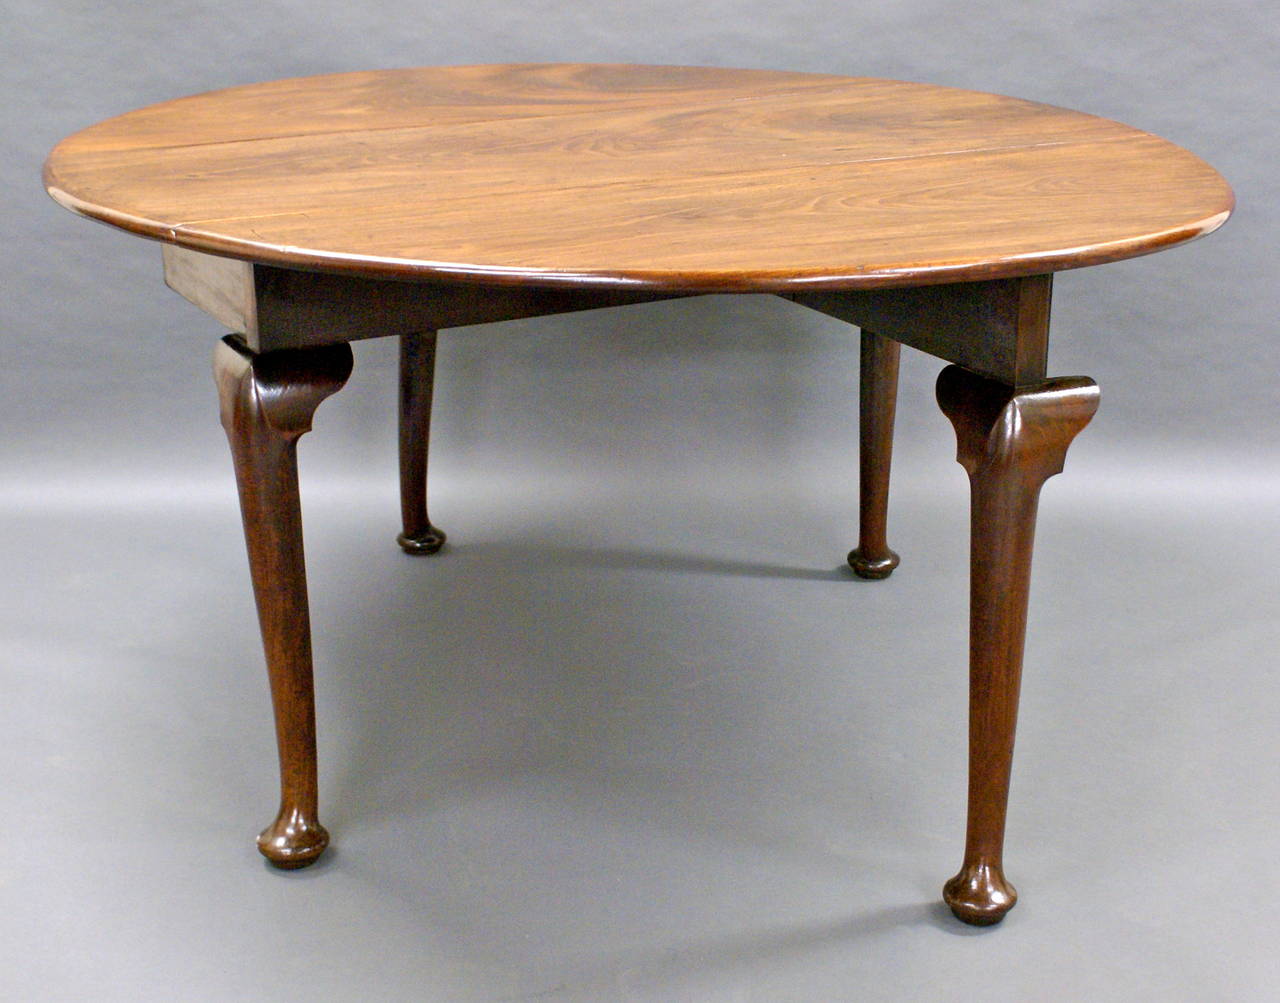 On cabroile legs with pad feet, the oval top is of outstanding colour and patina. The table is in very good and original condition, circa 1750.